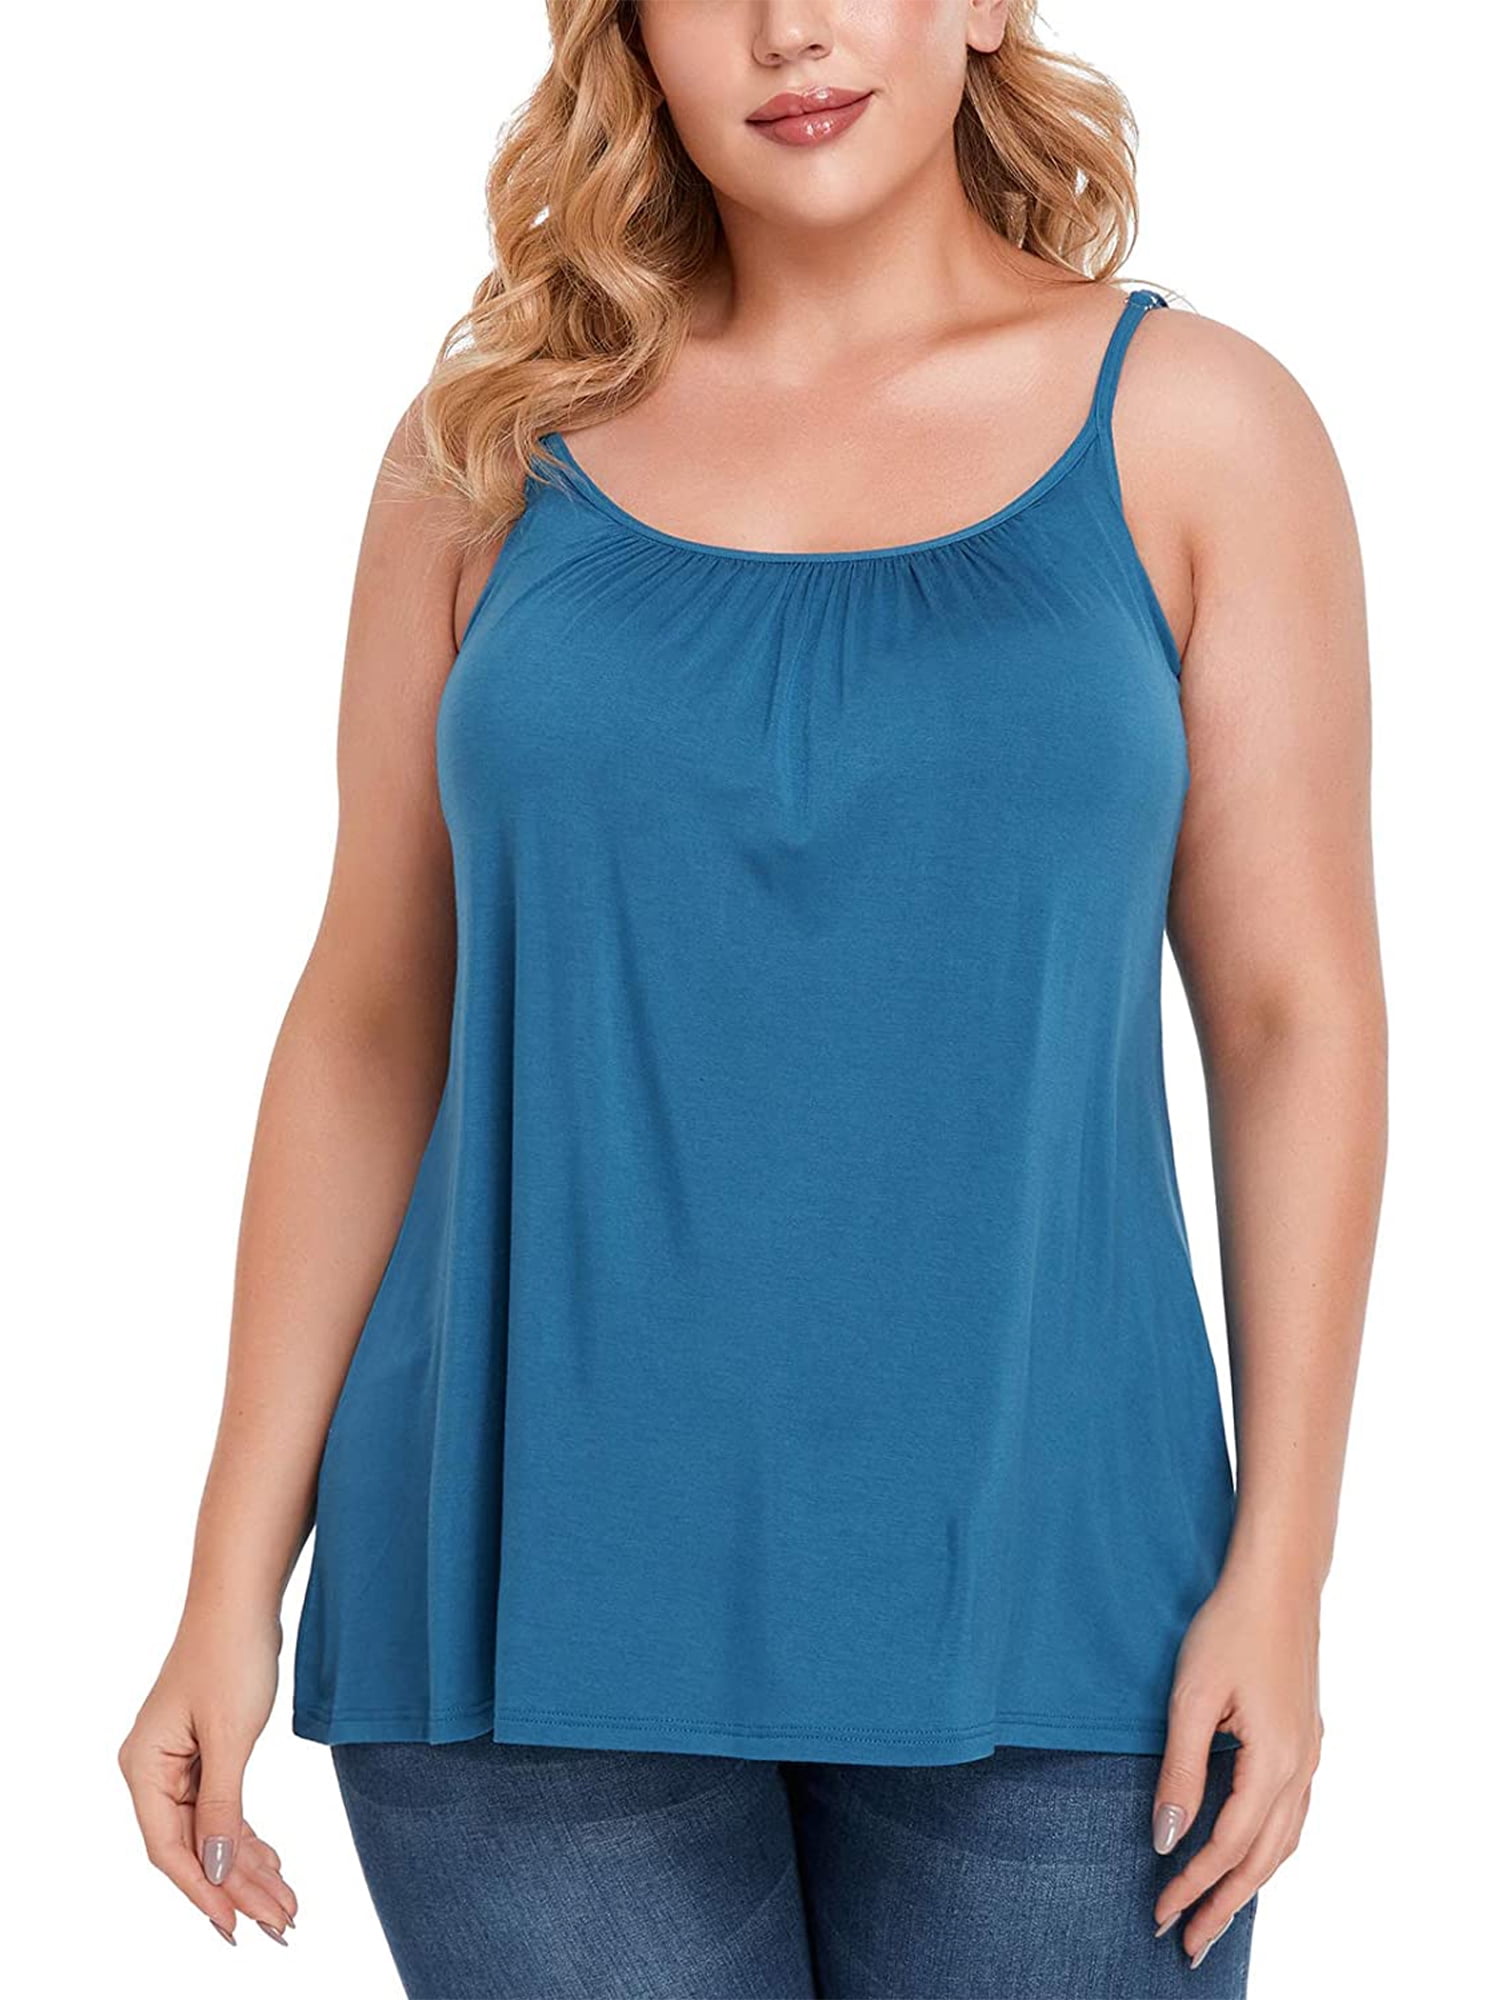 COMFREE Camisole with Built in Padded Bra for Women Plus Size Adjustable  Spaghetti Strap Tank Top Cami Comfort S-4XL 